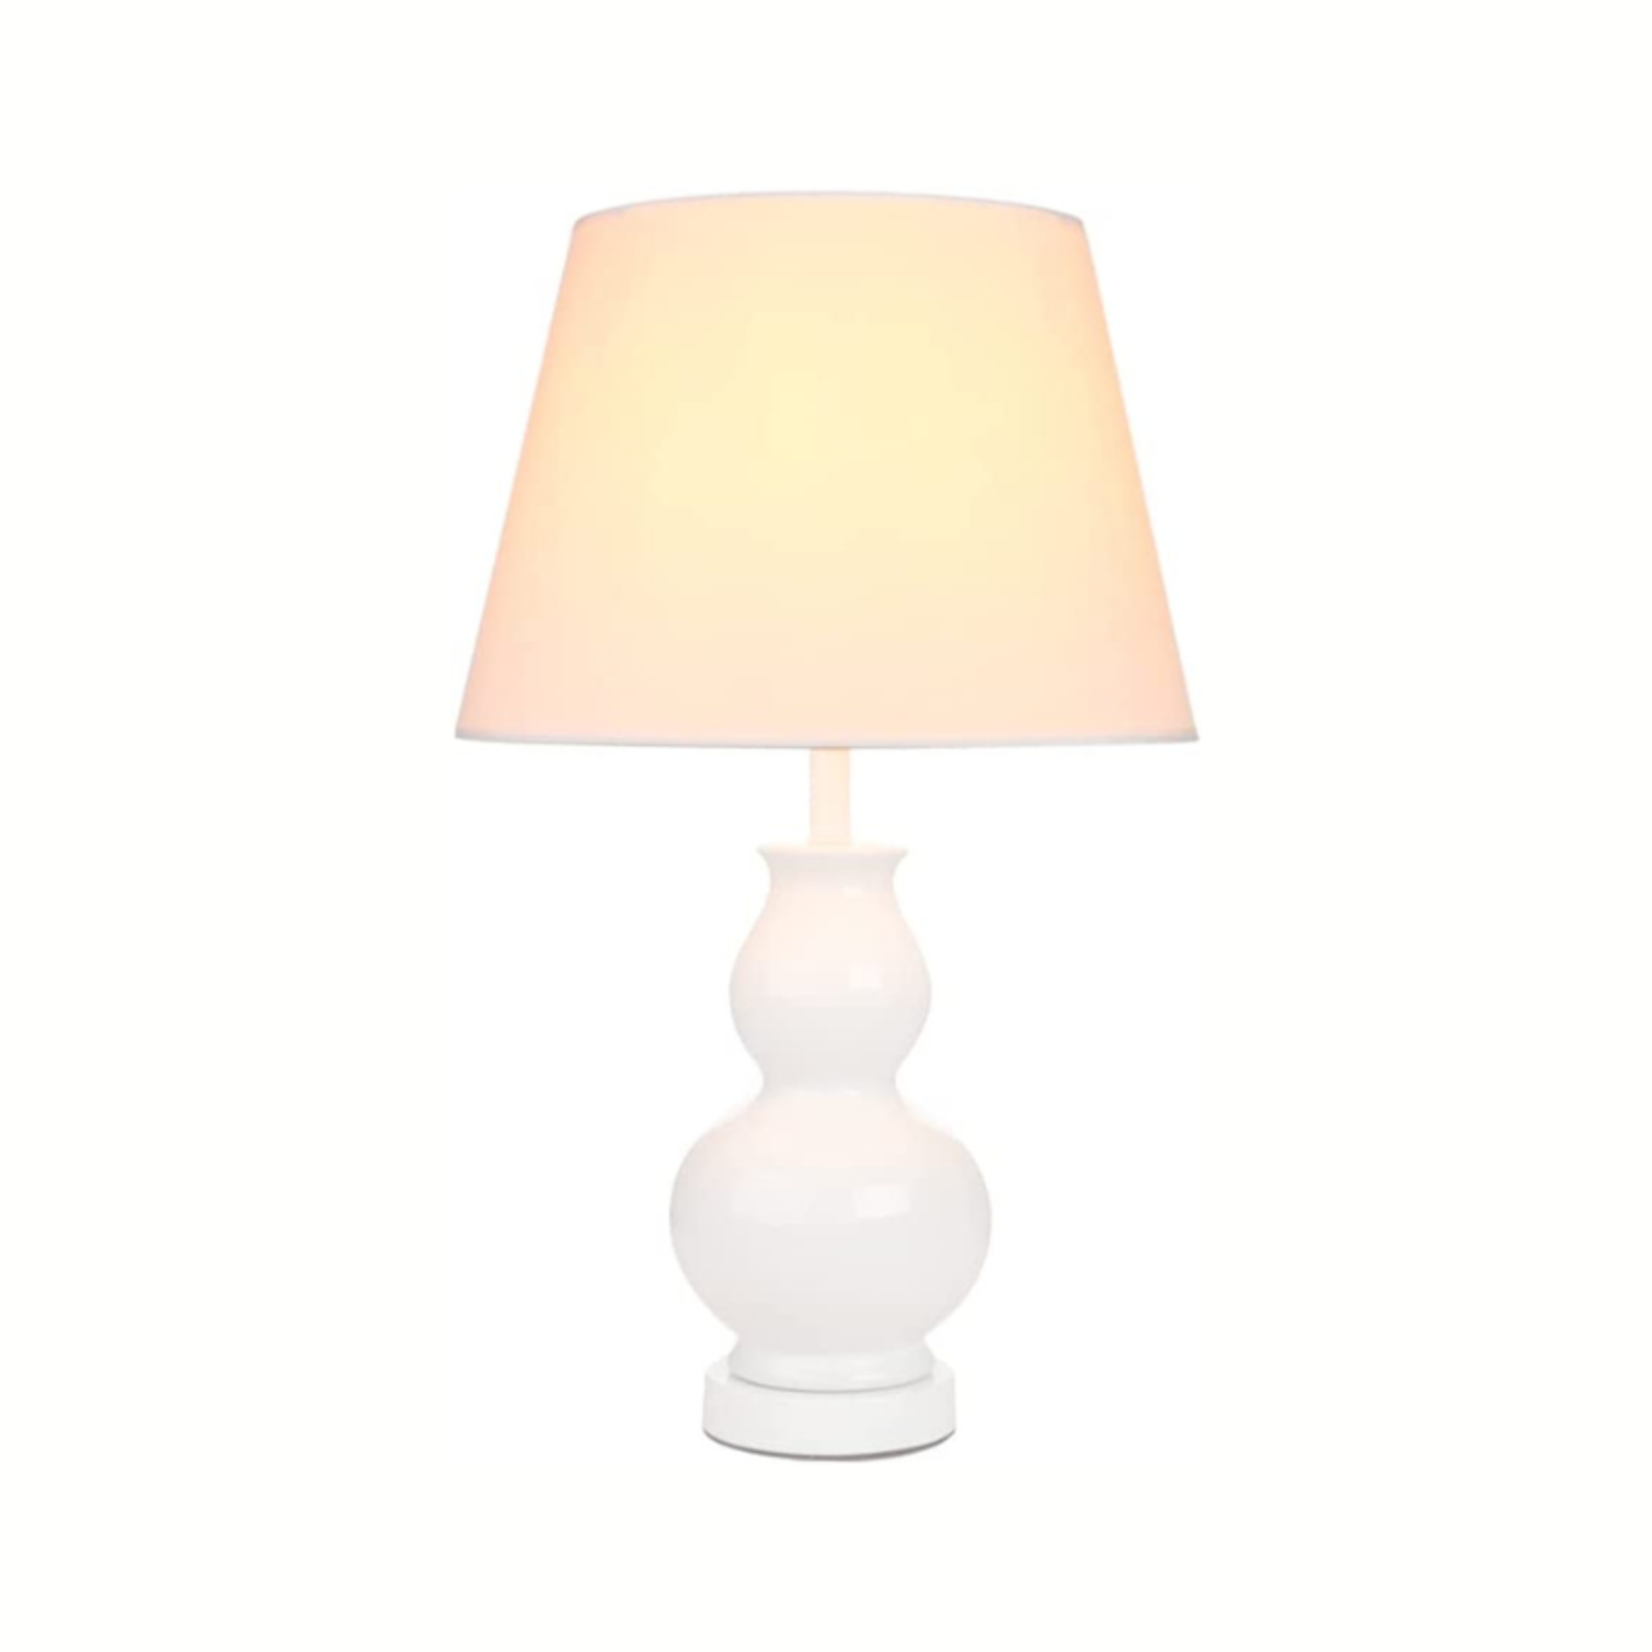 Permo Dimmable Table Lamp - White